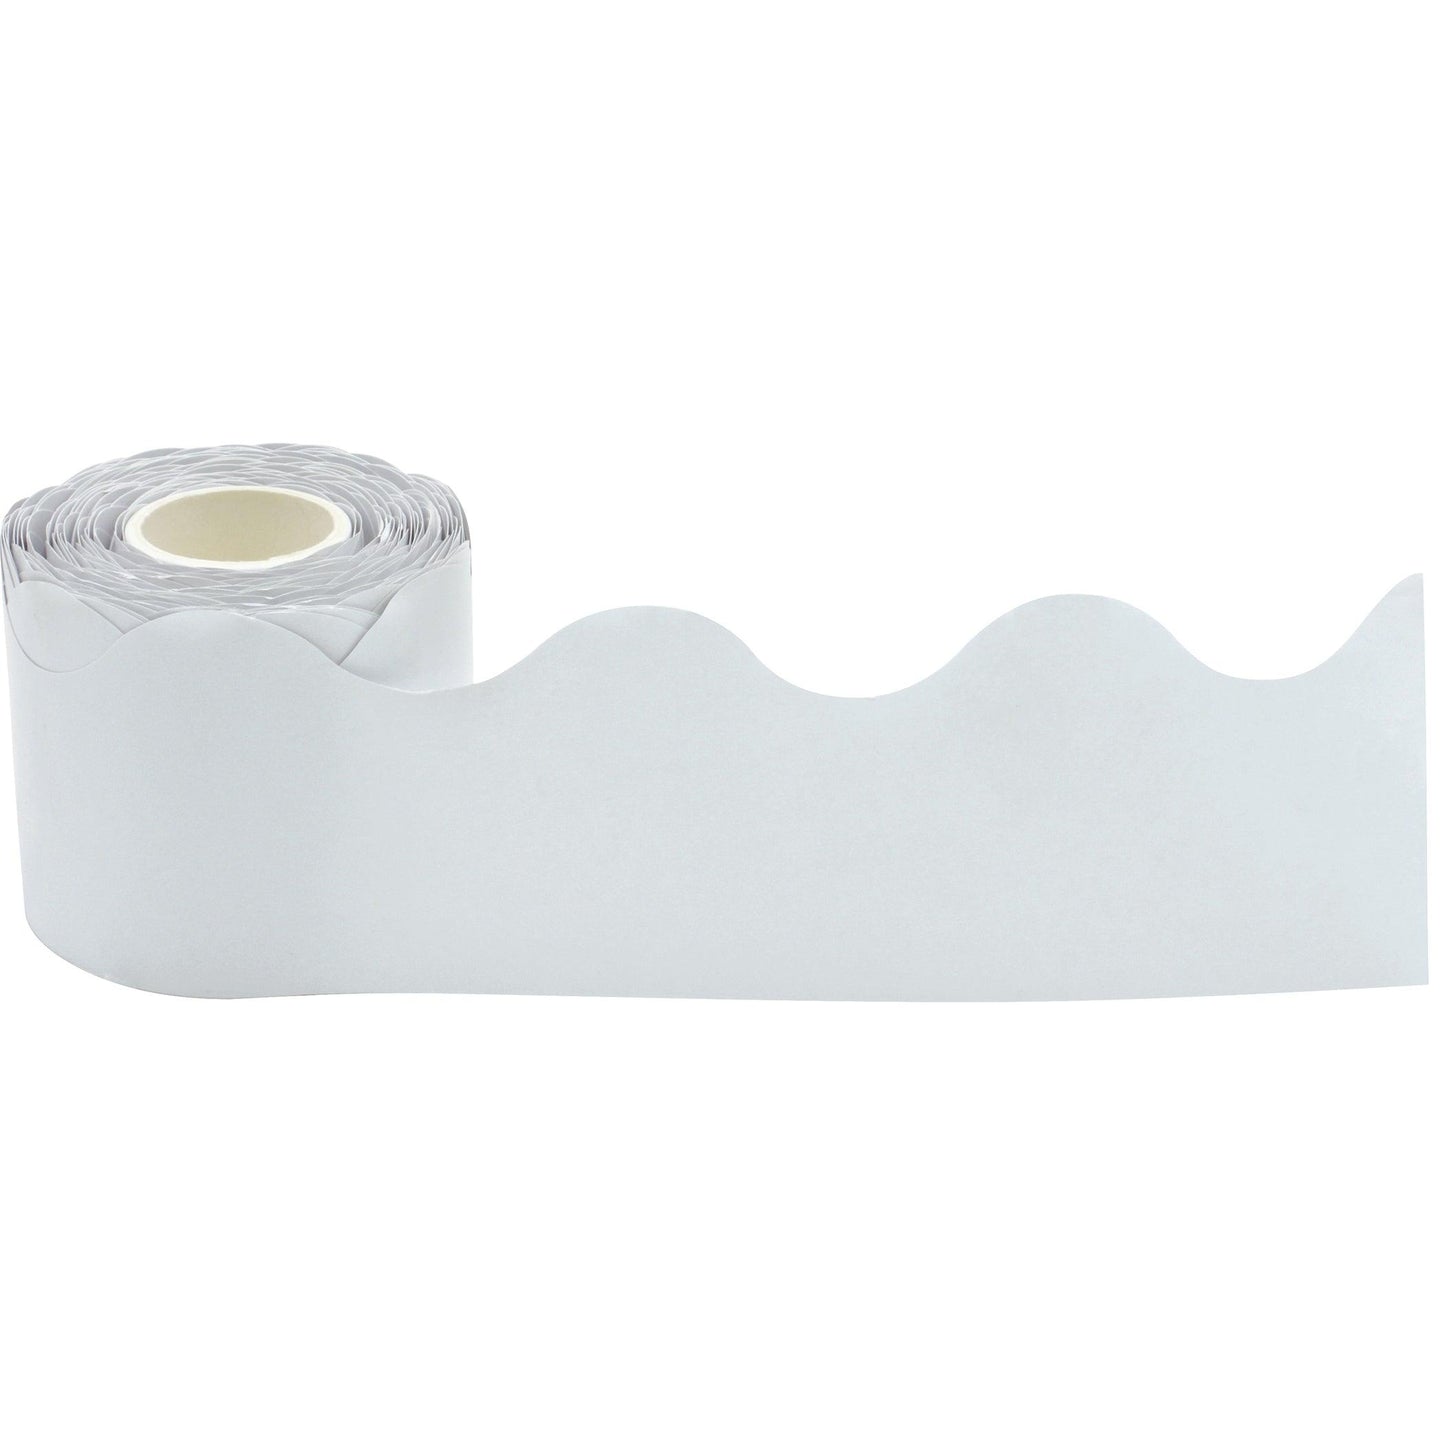 White Scalloped Rolled Border Trim, 50 Feet Per Roll, Pack of 3 - Loomini